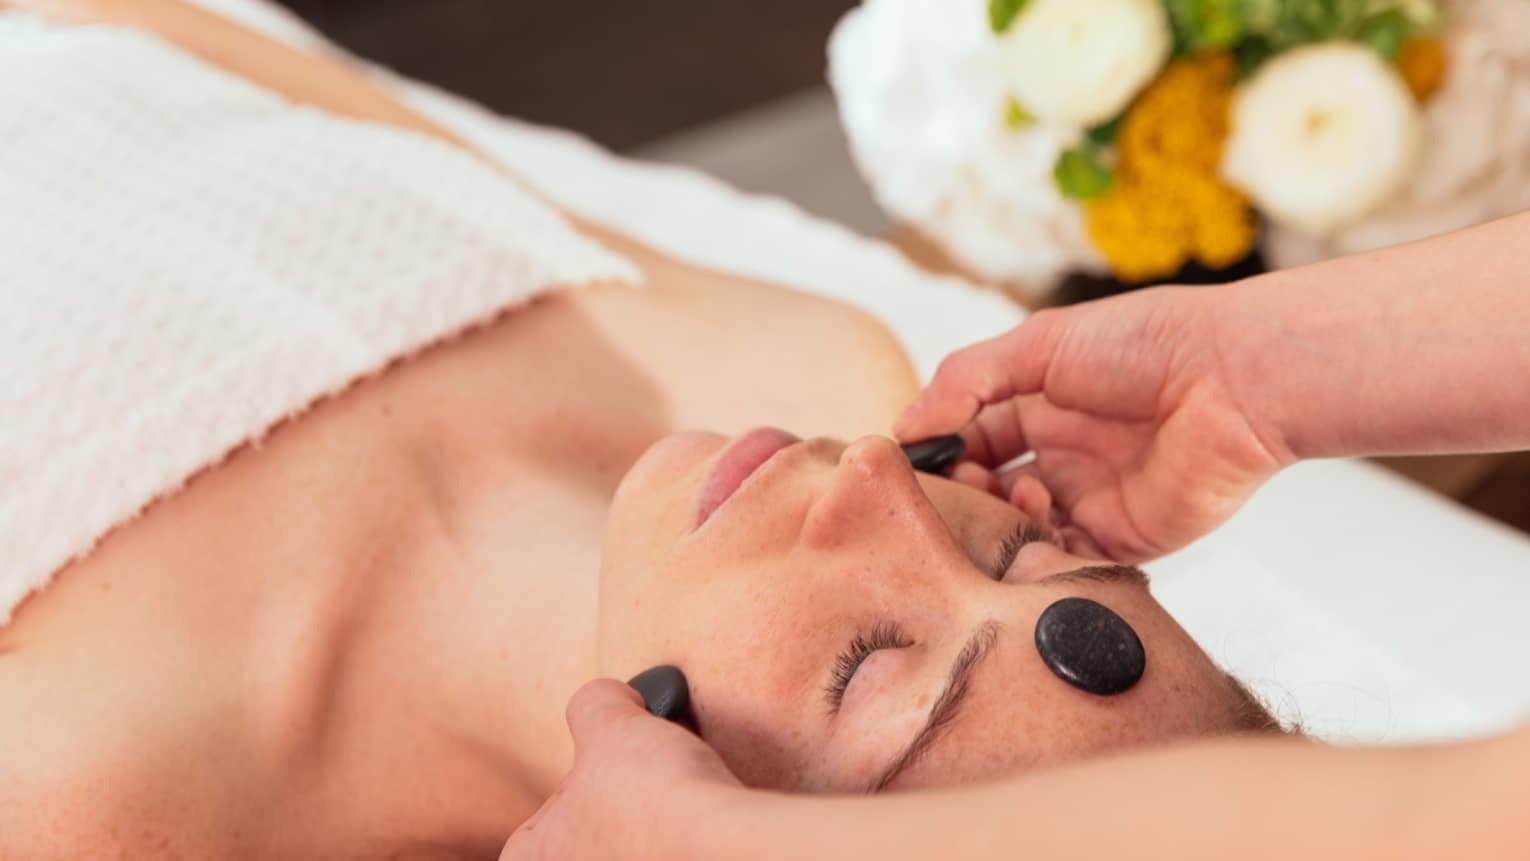 Spa staff places black stones on woman's face as she lays on treatment table